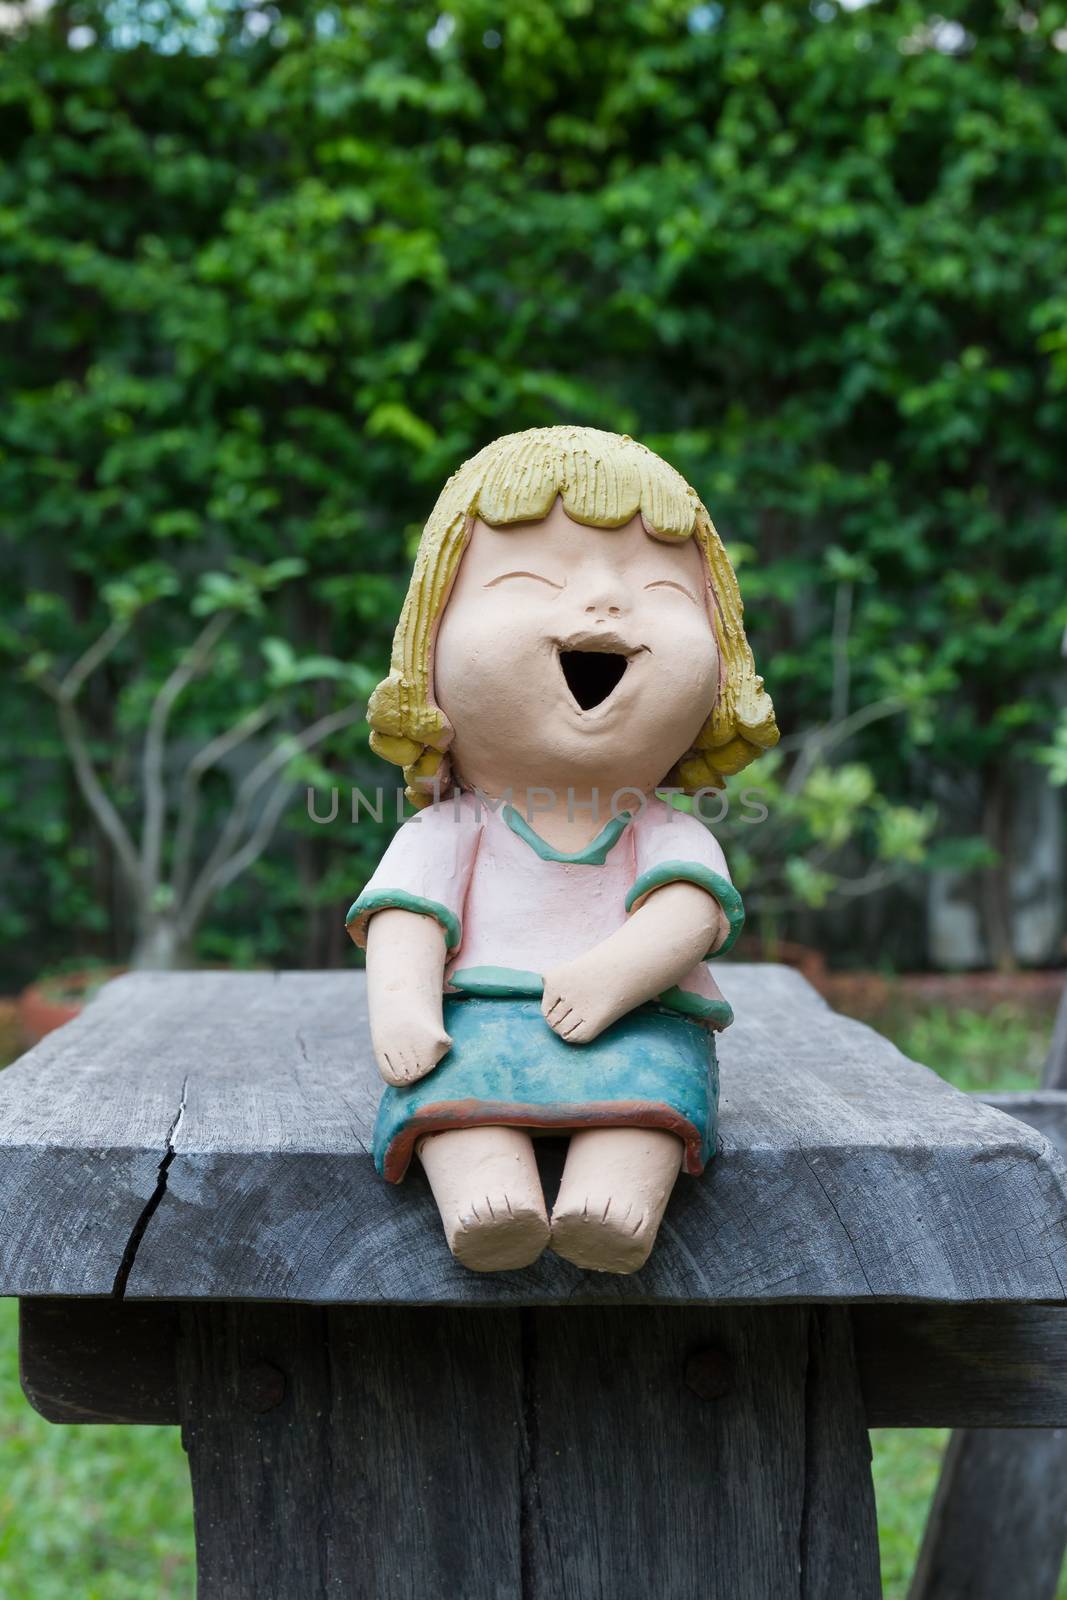 Laughing clay doll sit on the wooden chair